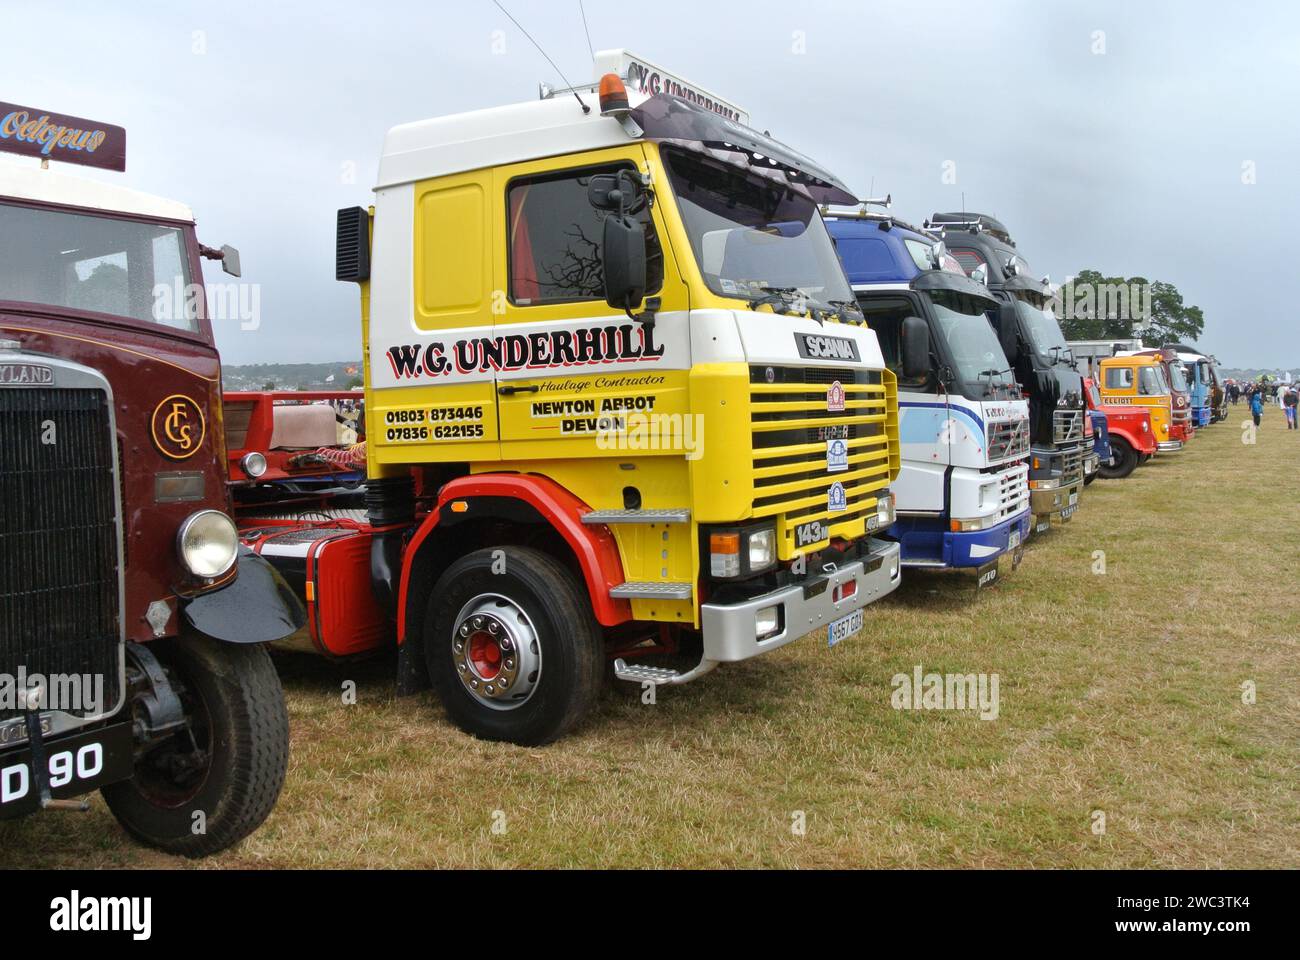 A line of classic commercial lorries parked on display at the 48th Historic Vehicle Gathering classic car show, Powderham, Devon, England, UK. Stock Photo